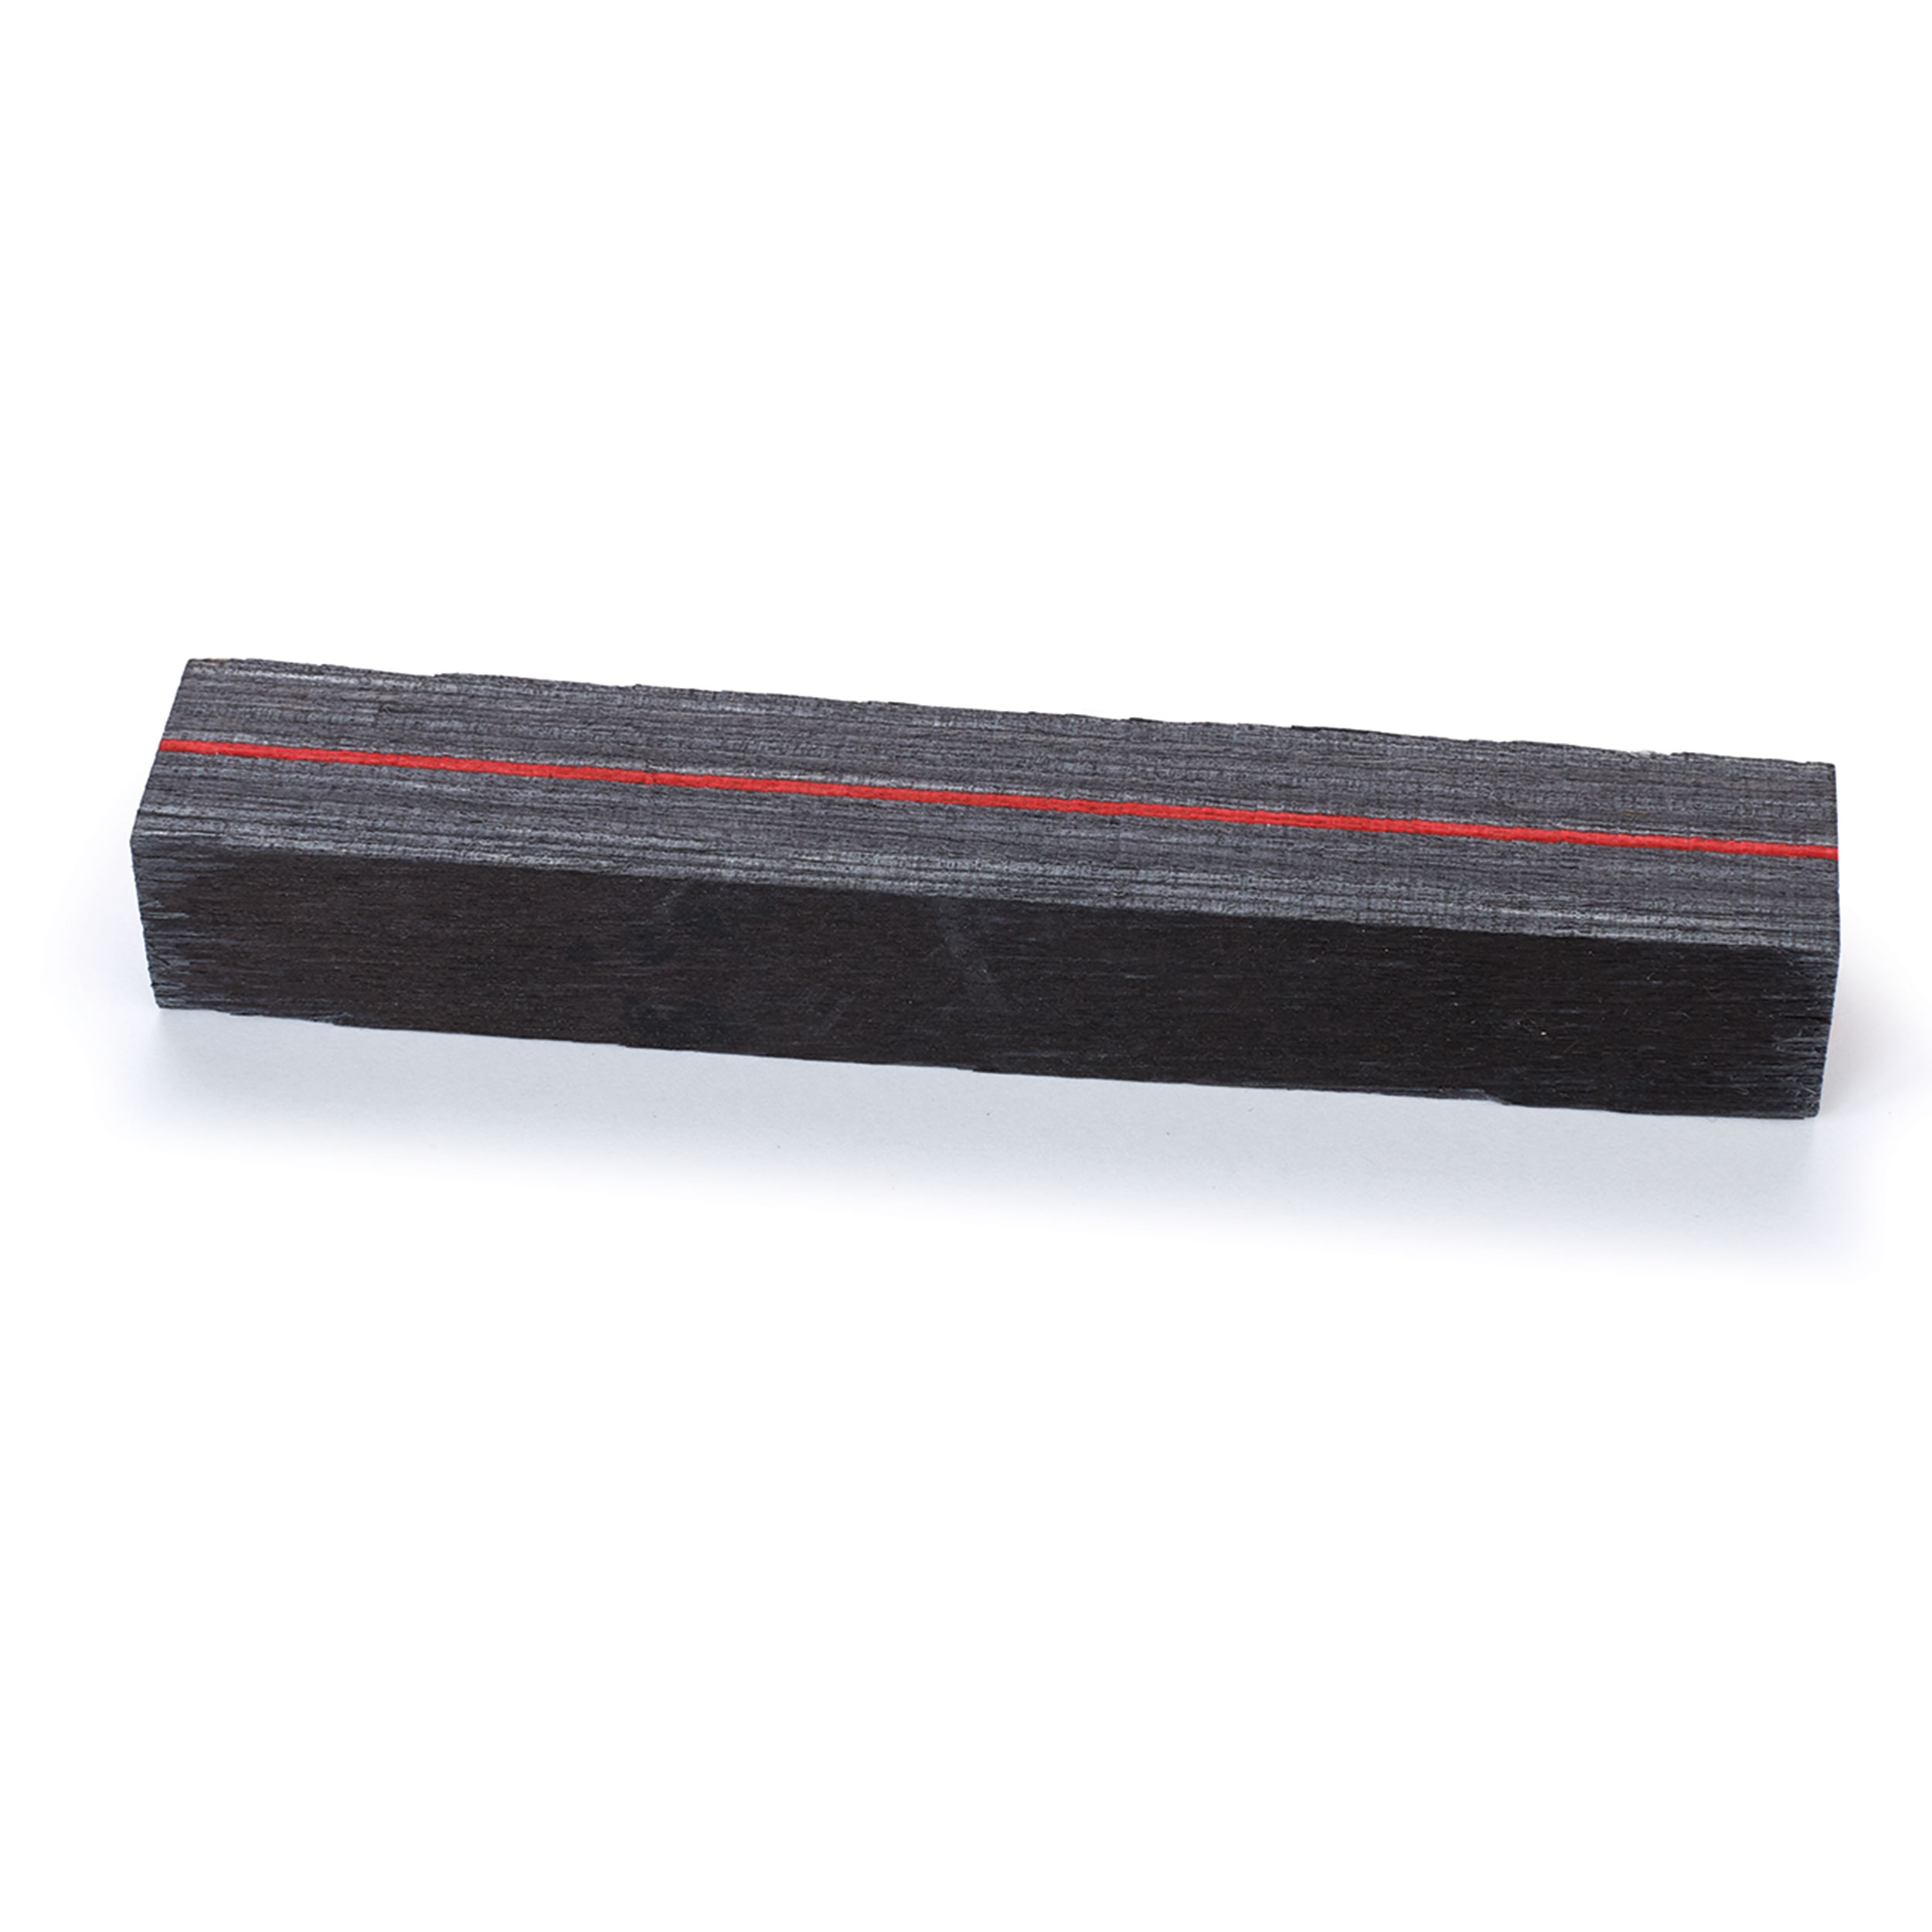 Spectraply Pen Blank Thin Red Line 3/4" X 3/4" X 5"